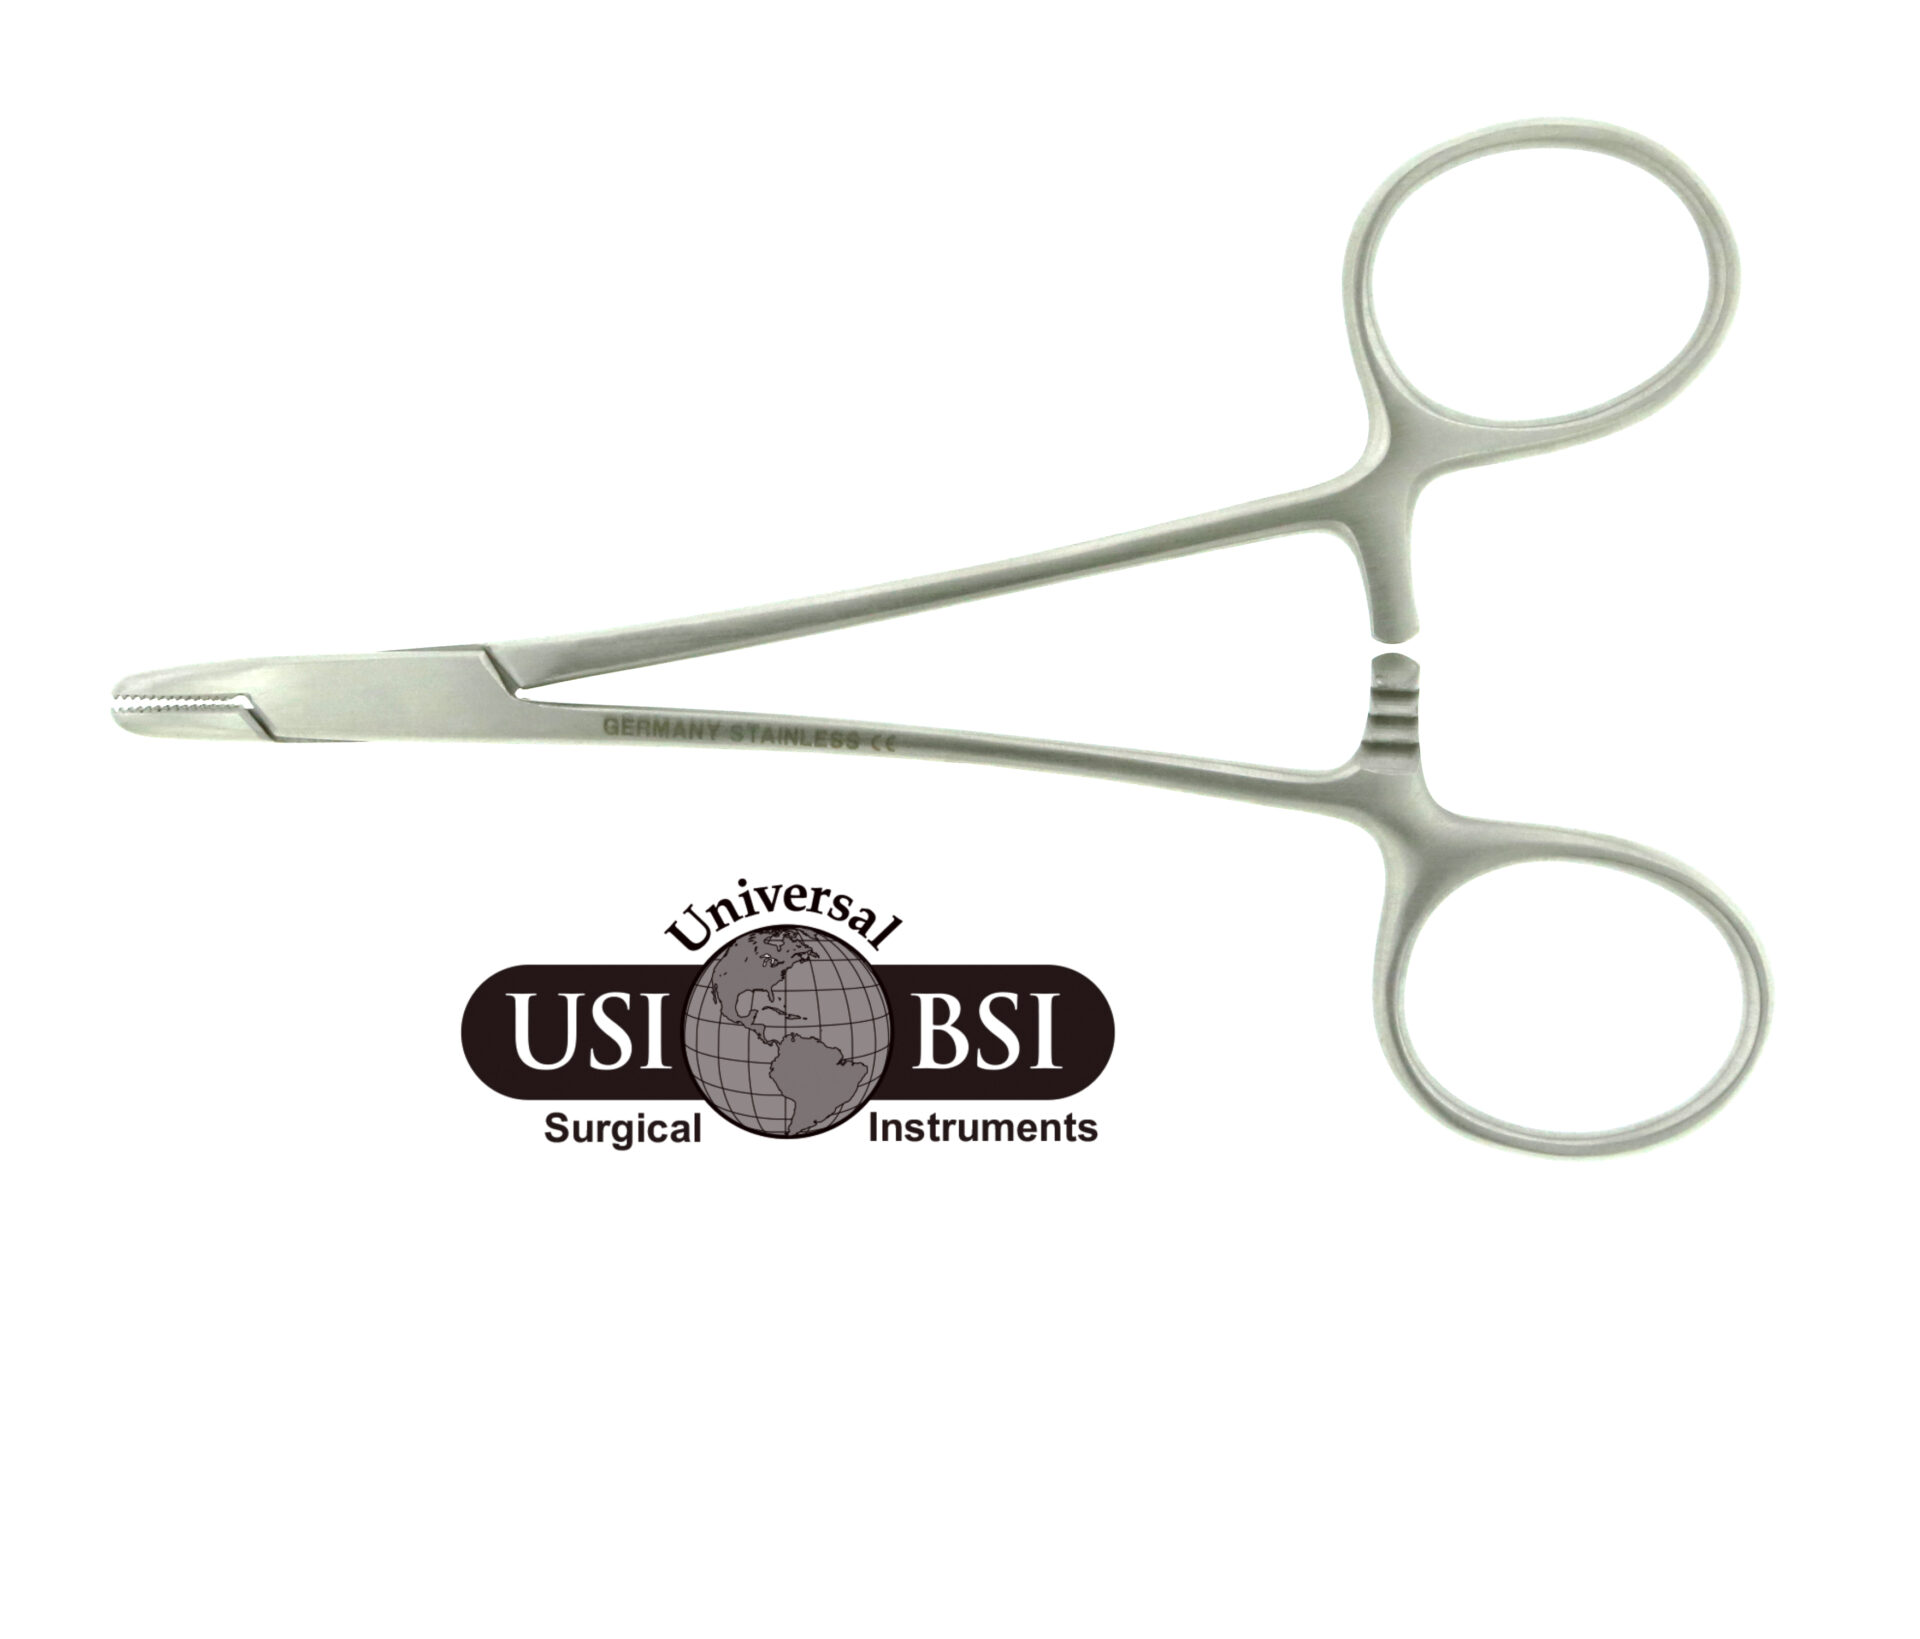 A pair of scissors with a small tip.